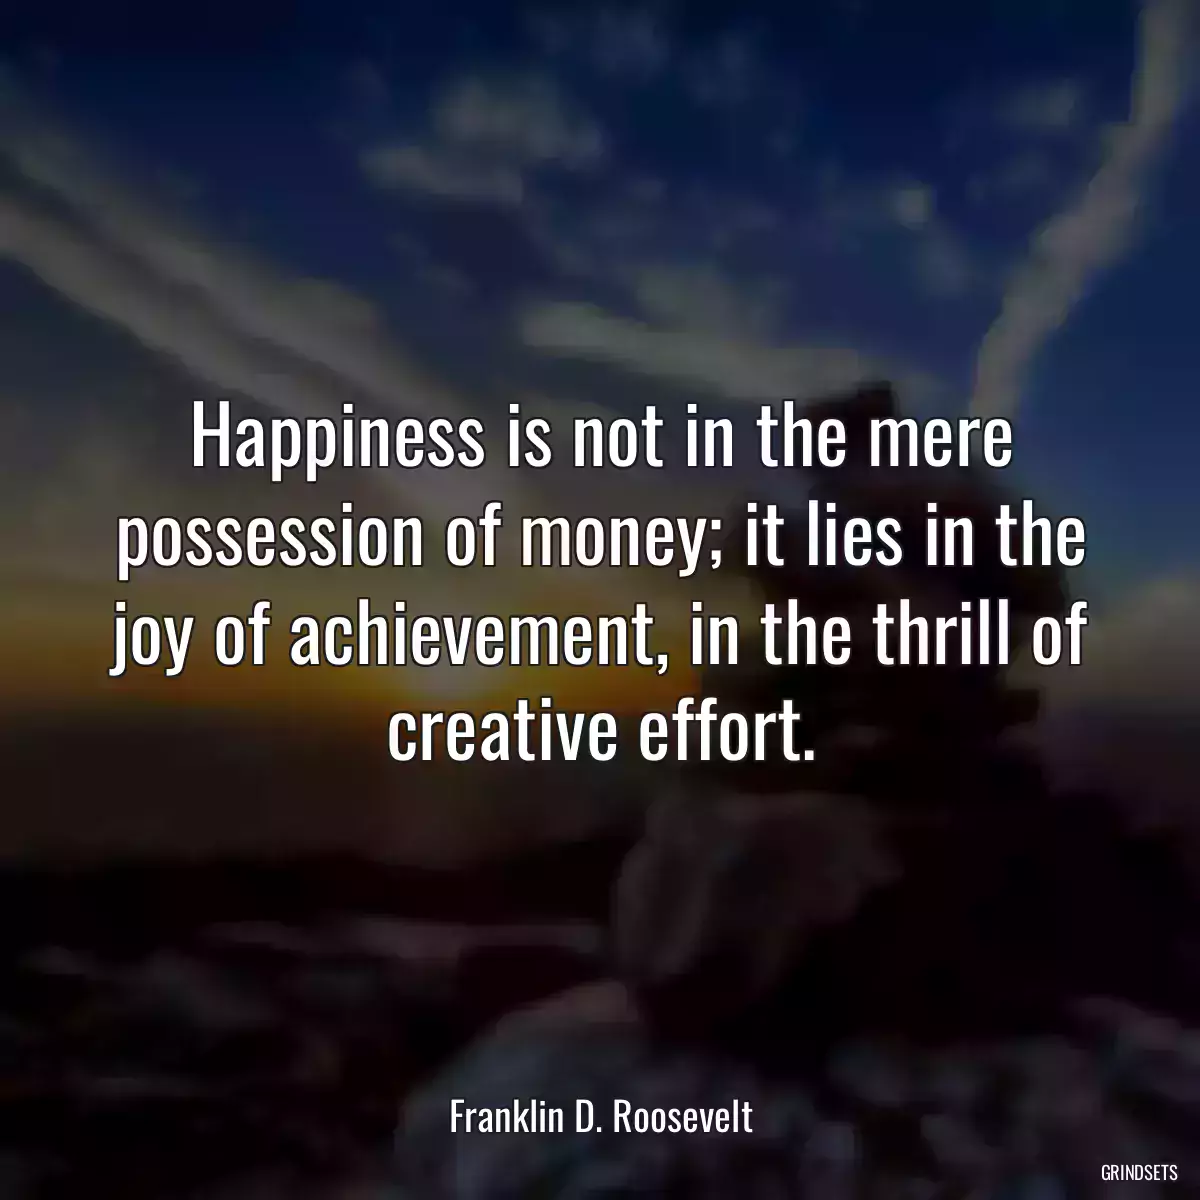 Happiness is not in the mere possession of money; it lies in the joy of achievement, in the thrill of creative effort.